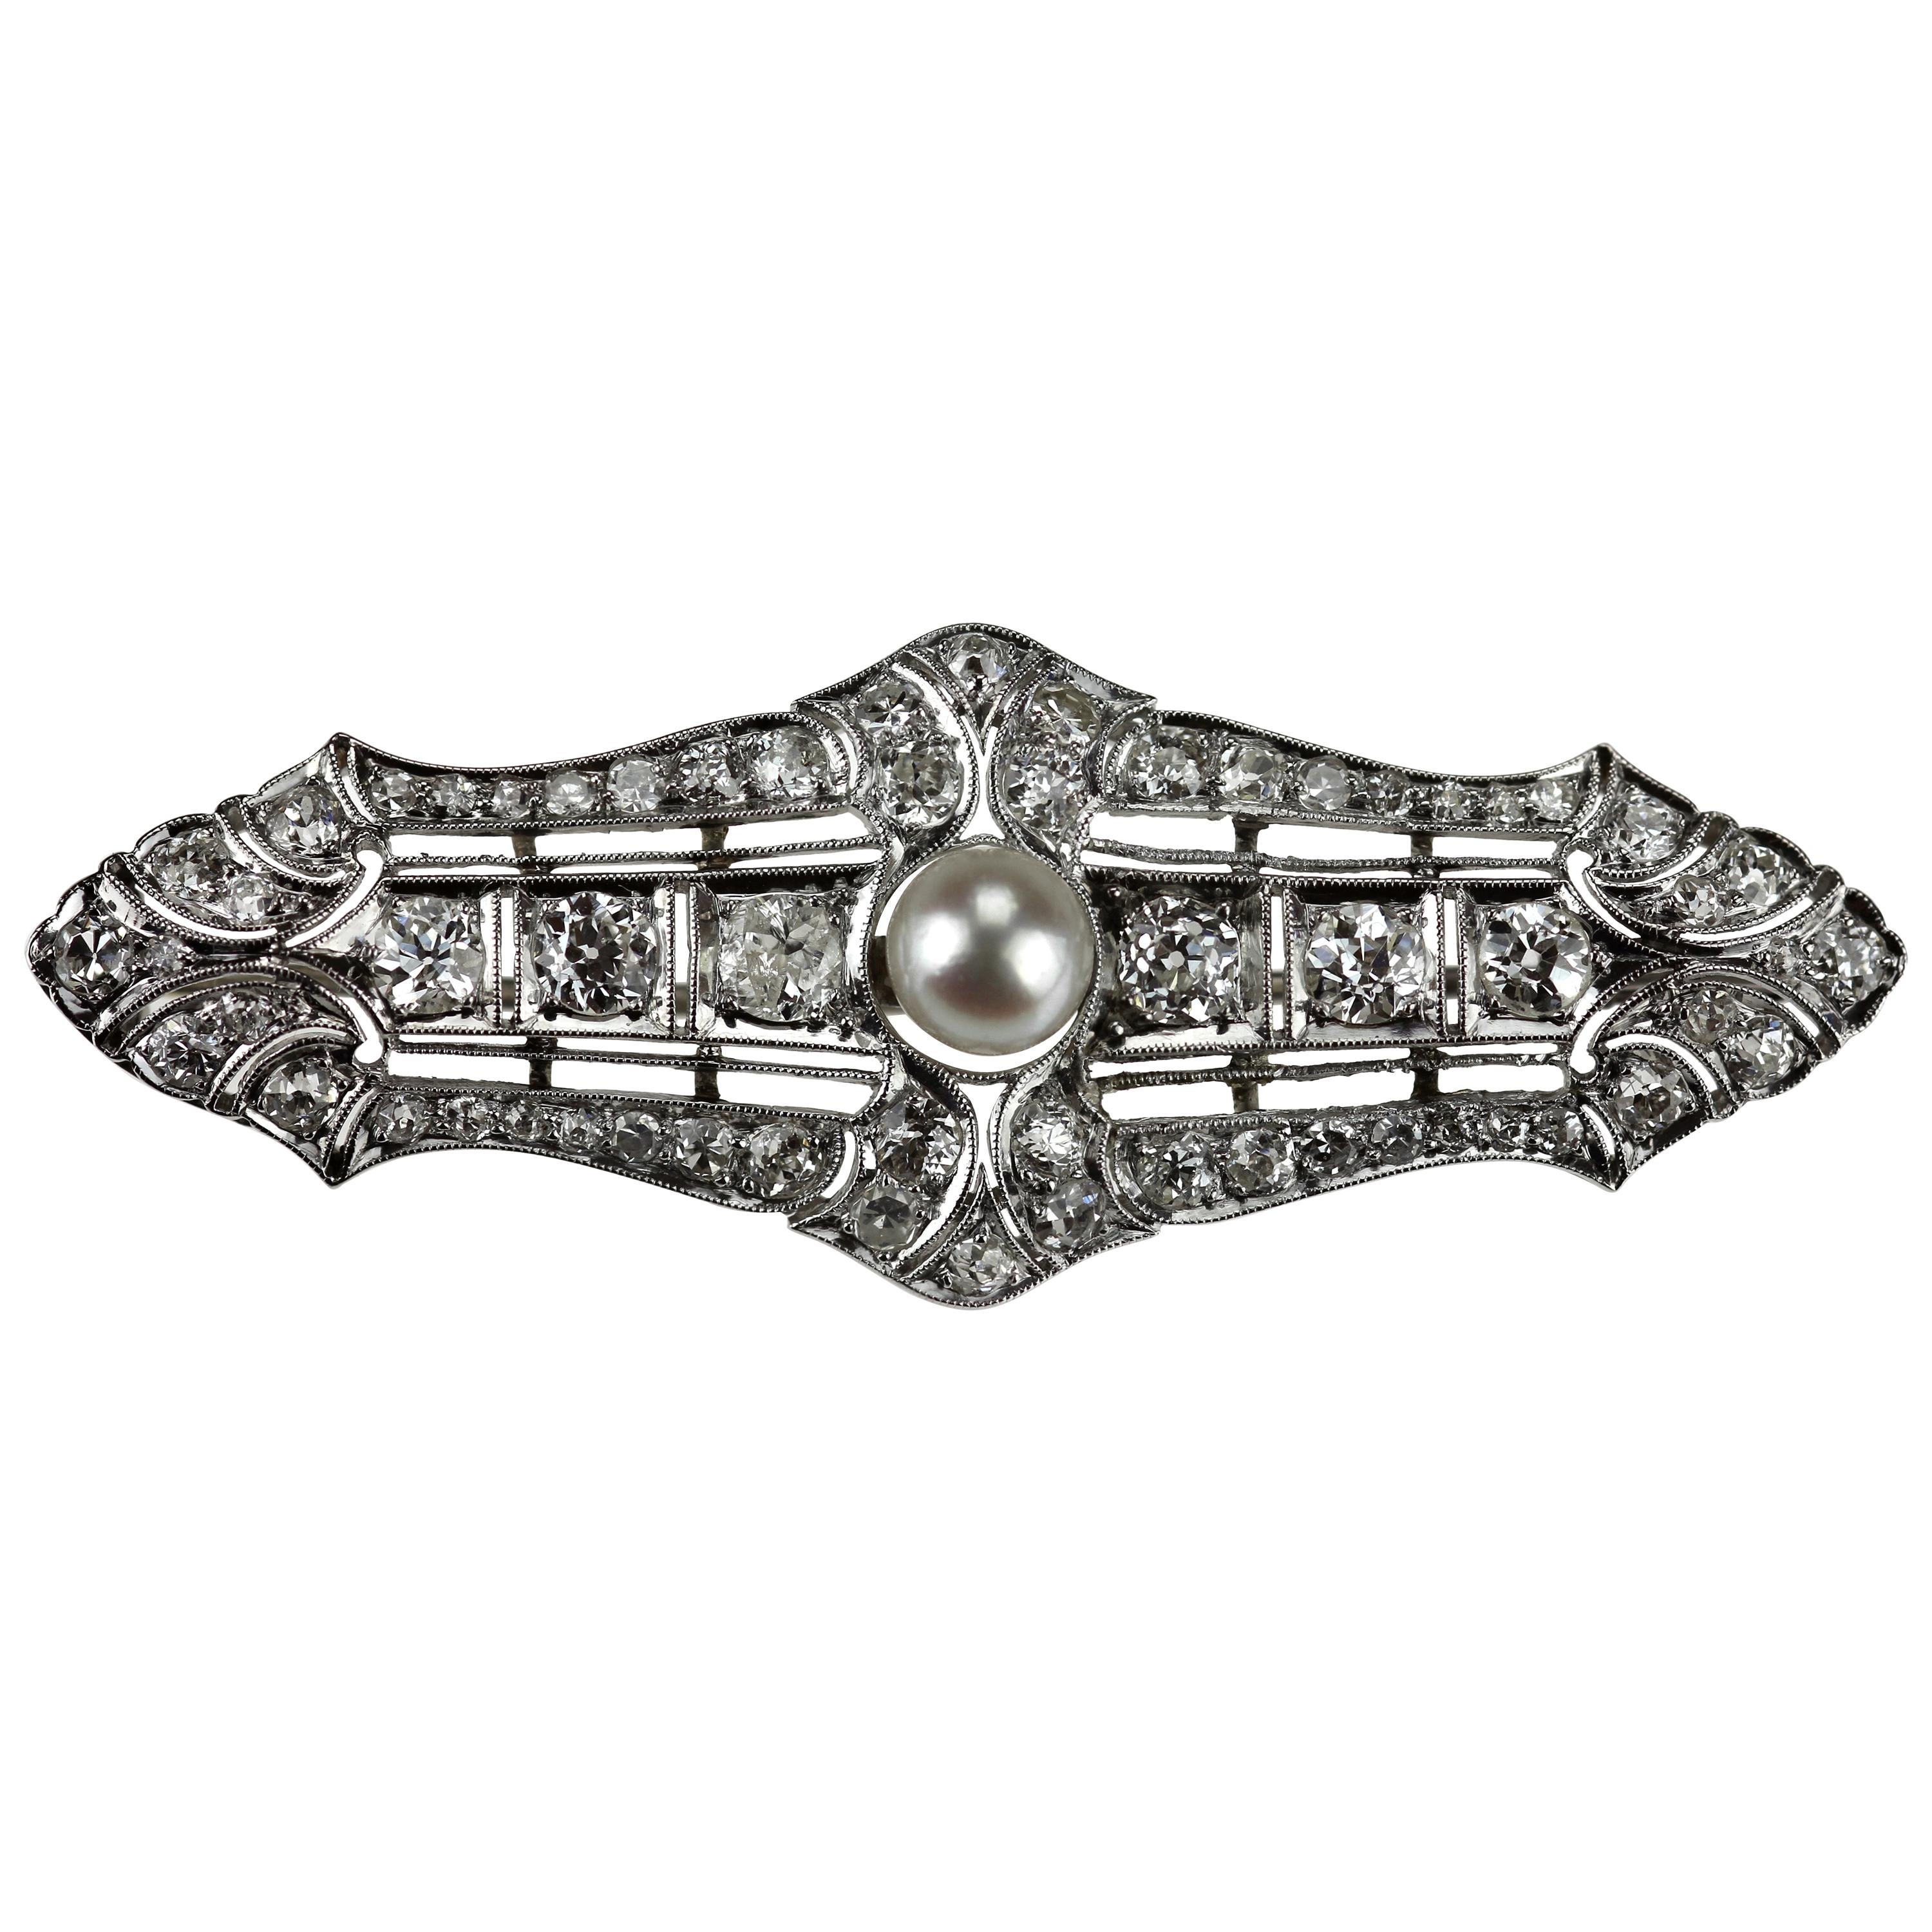 Antique Edwardian Old European Cut Diamonds and Pearl Brooch in Platinum